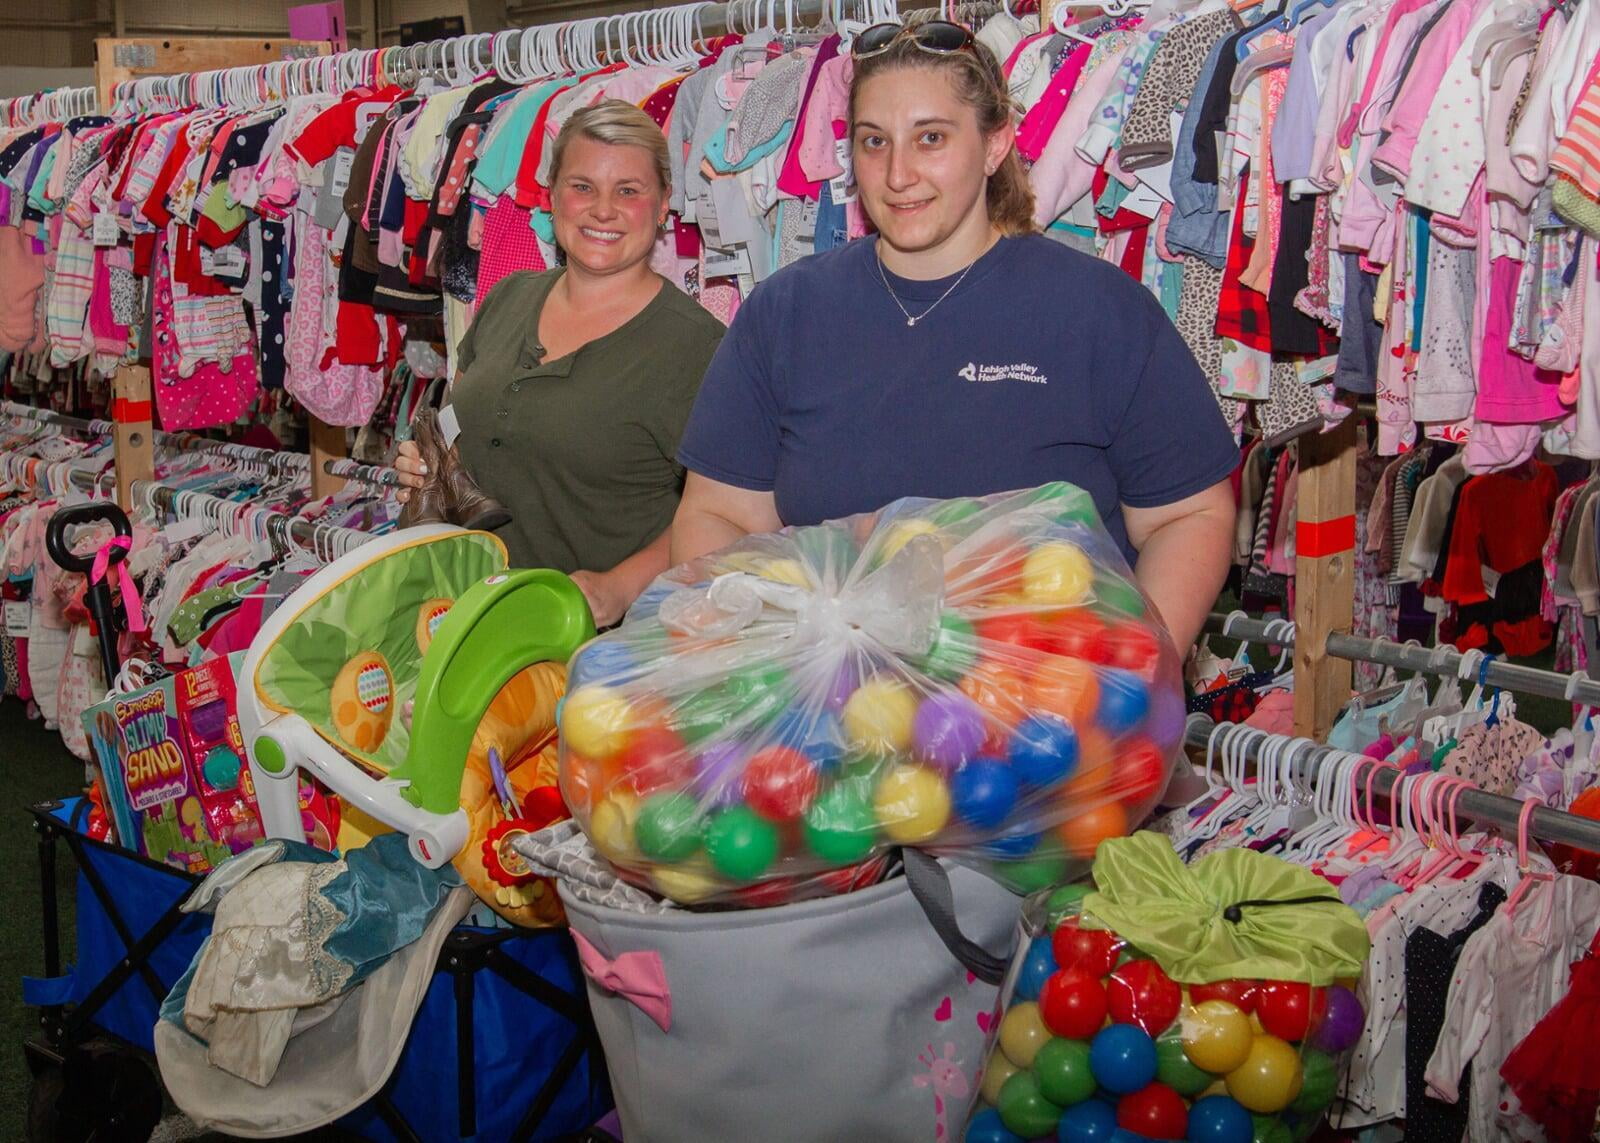 A couple with their arms around each other shopping at the JBF sale. The lady has some infant clothing hanging on her arm.